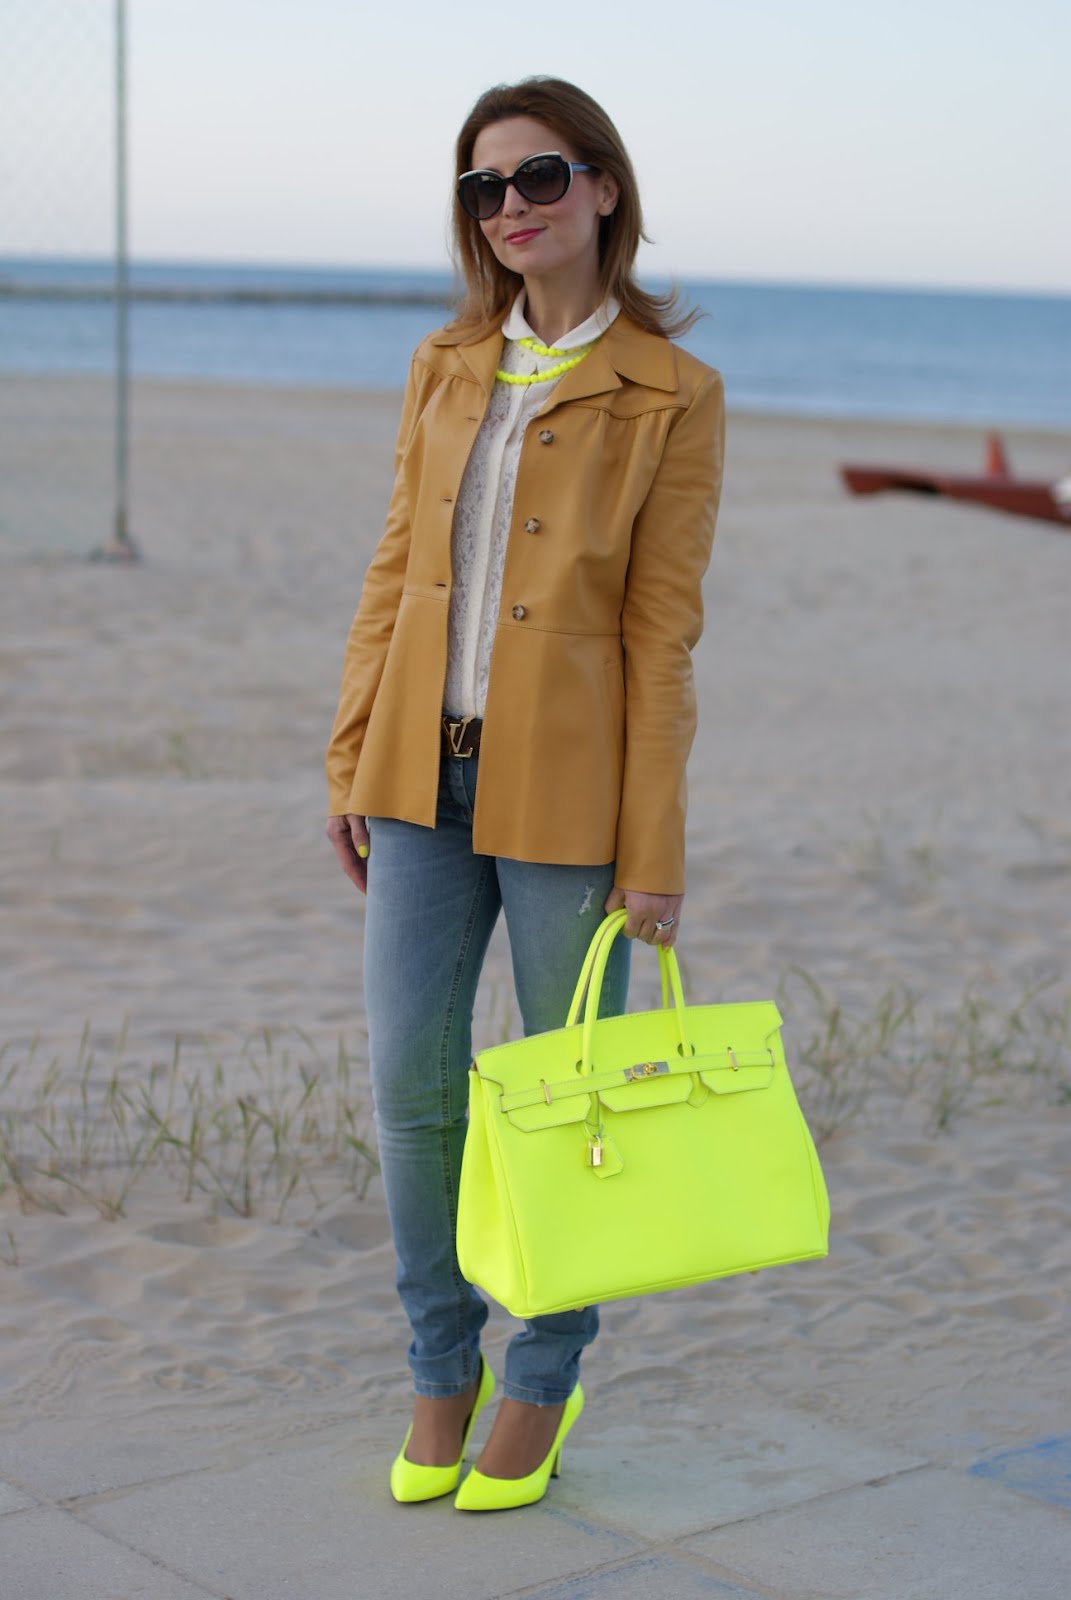 Neon yellow and neutrals | Fashion and Cookies - fashion and beauty blog